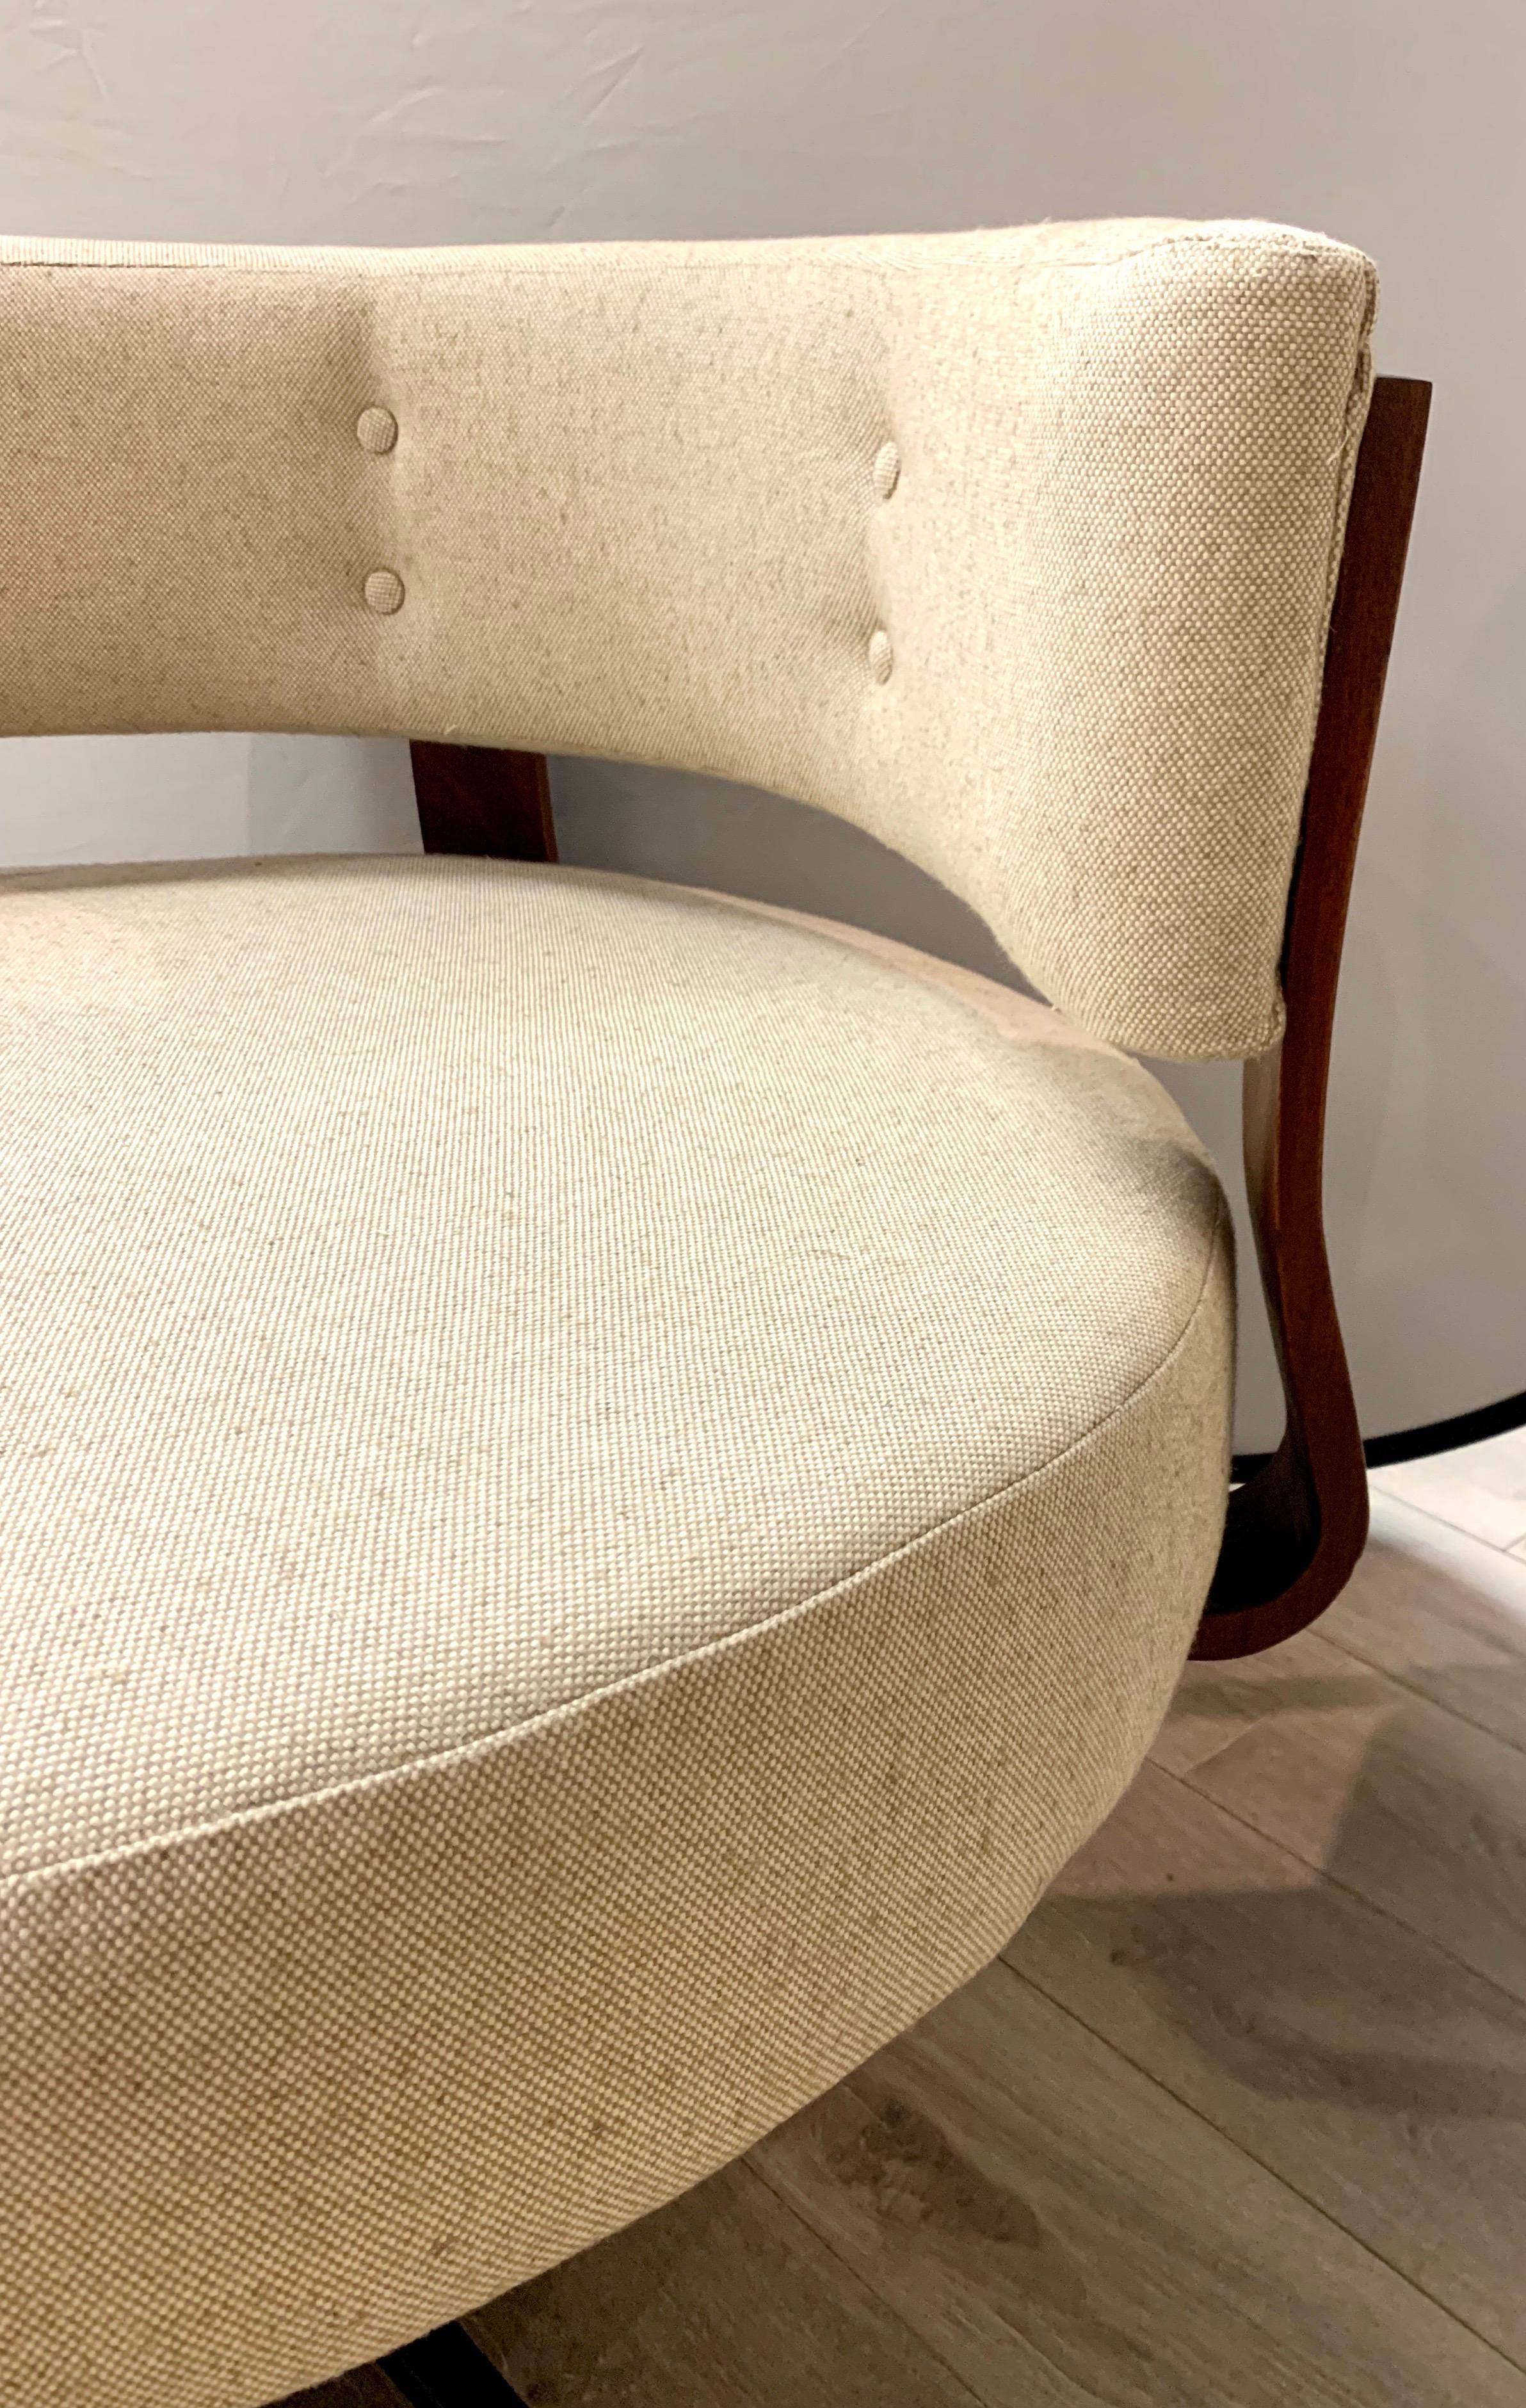 Mid-Century Modern Midcentury Large Round Swivel Chair Newly Upholstered in an Oatmeal Fabric